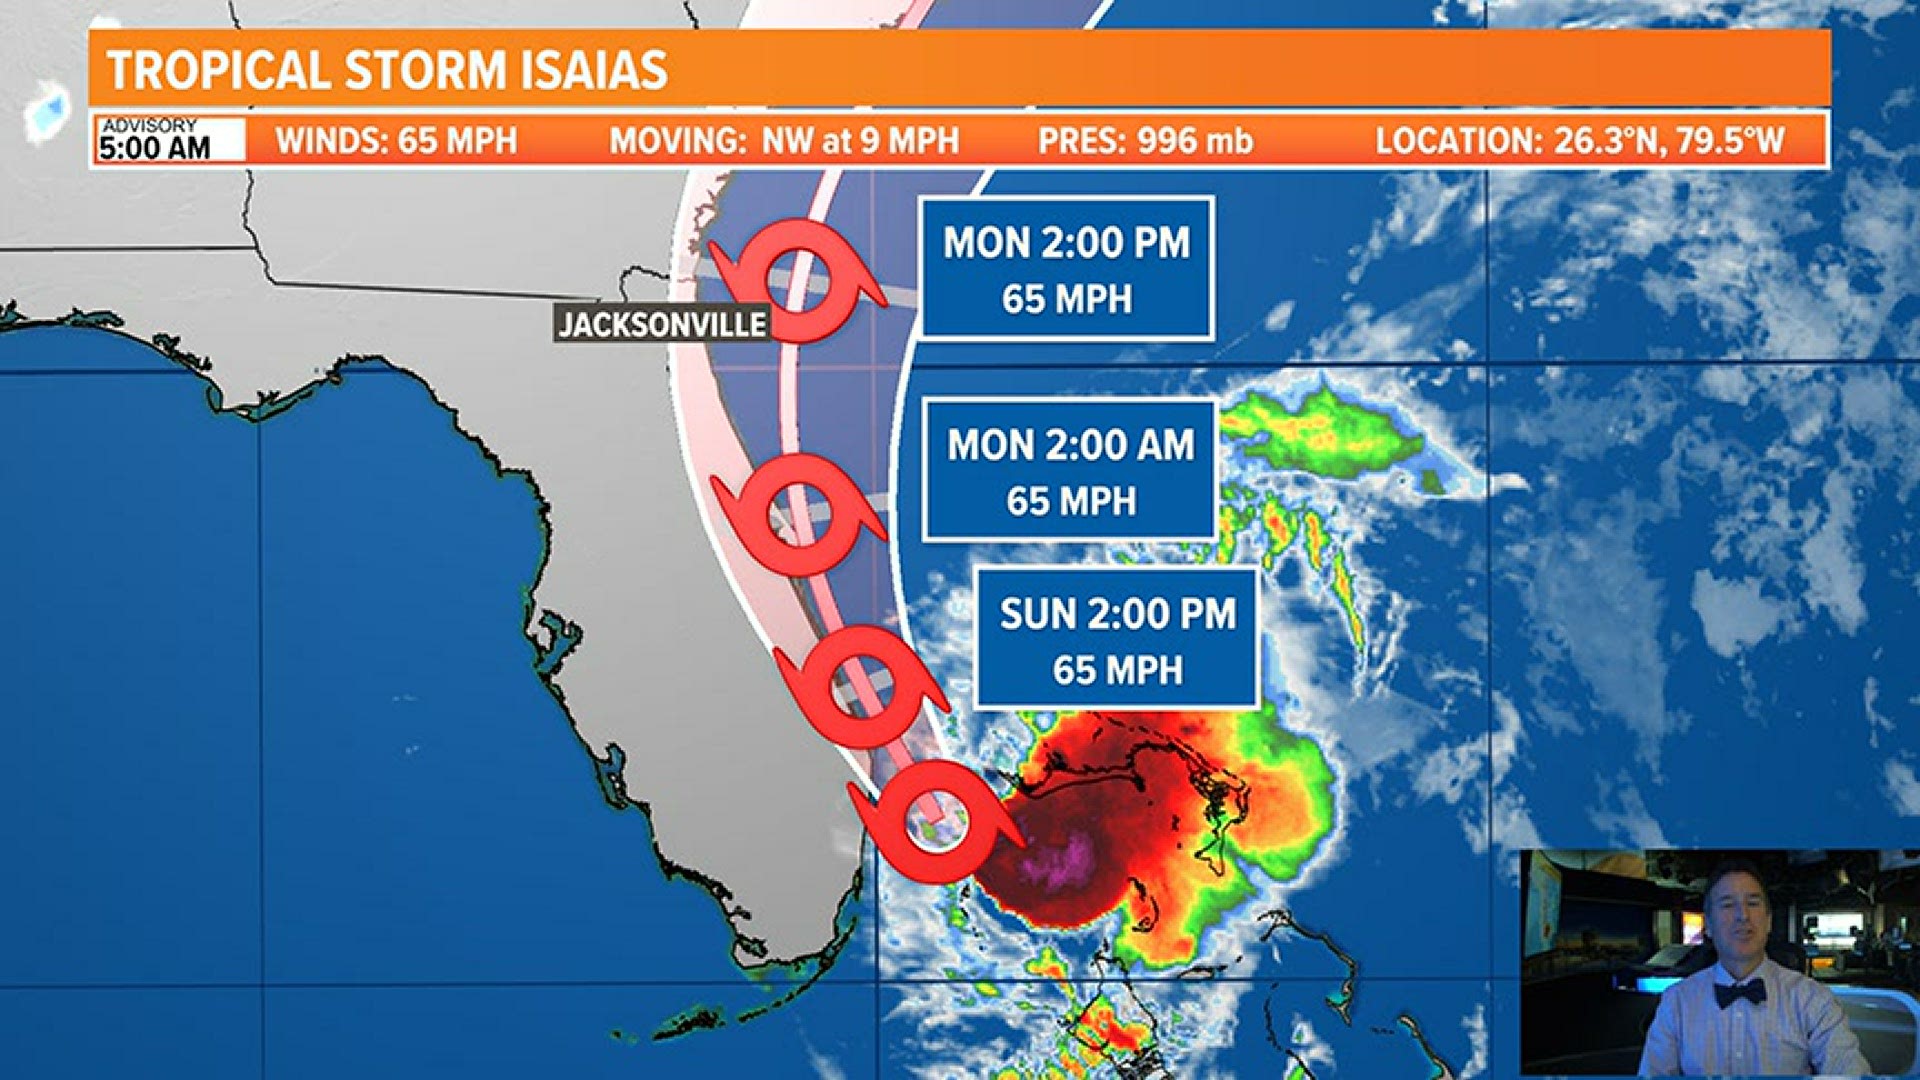 Good news is Isaias has not become better organized and its track stays east of our area. We do have tropical storm warnings in effect for all our coastal counties.